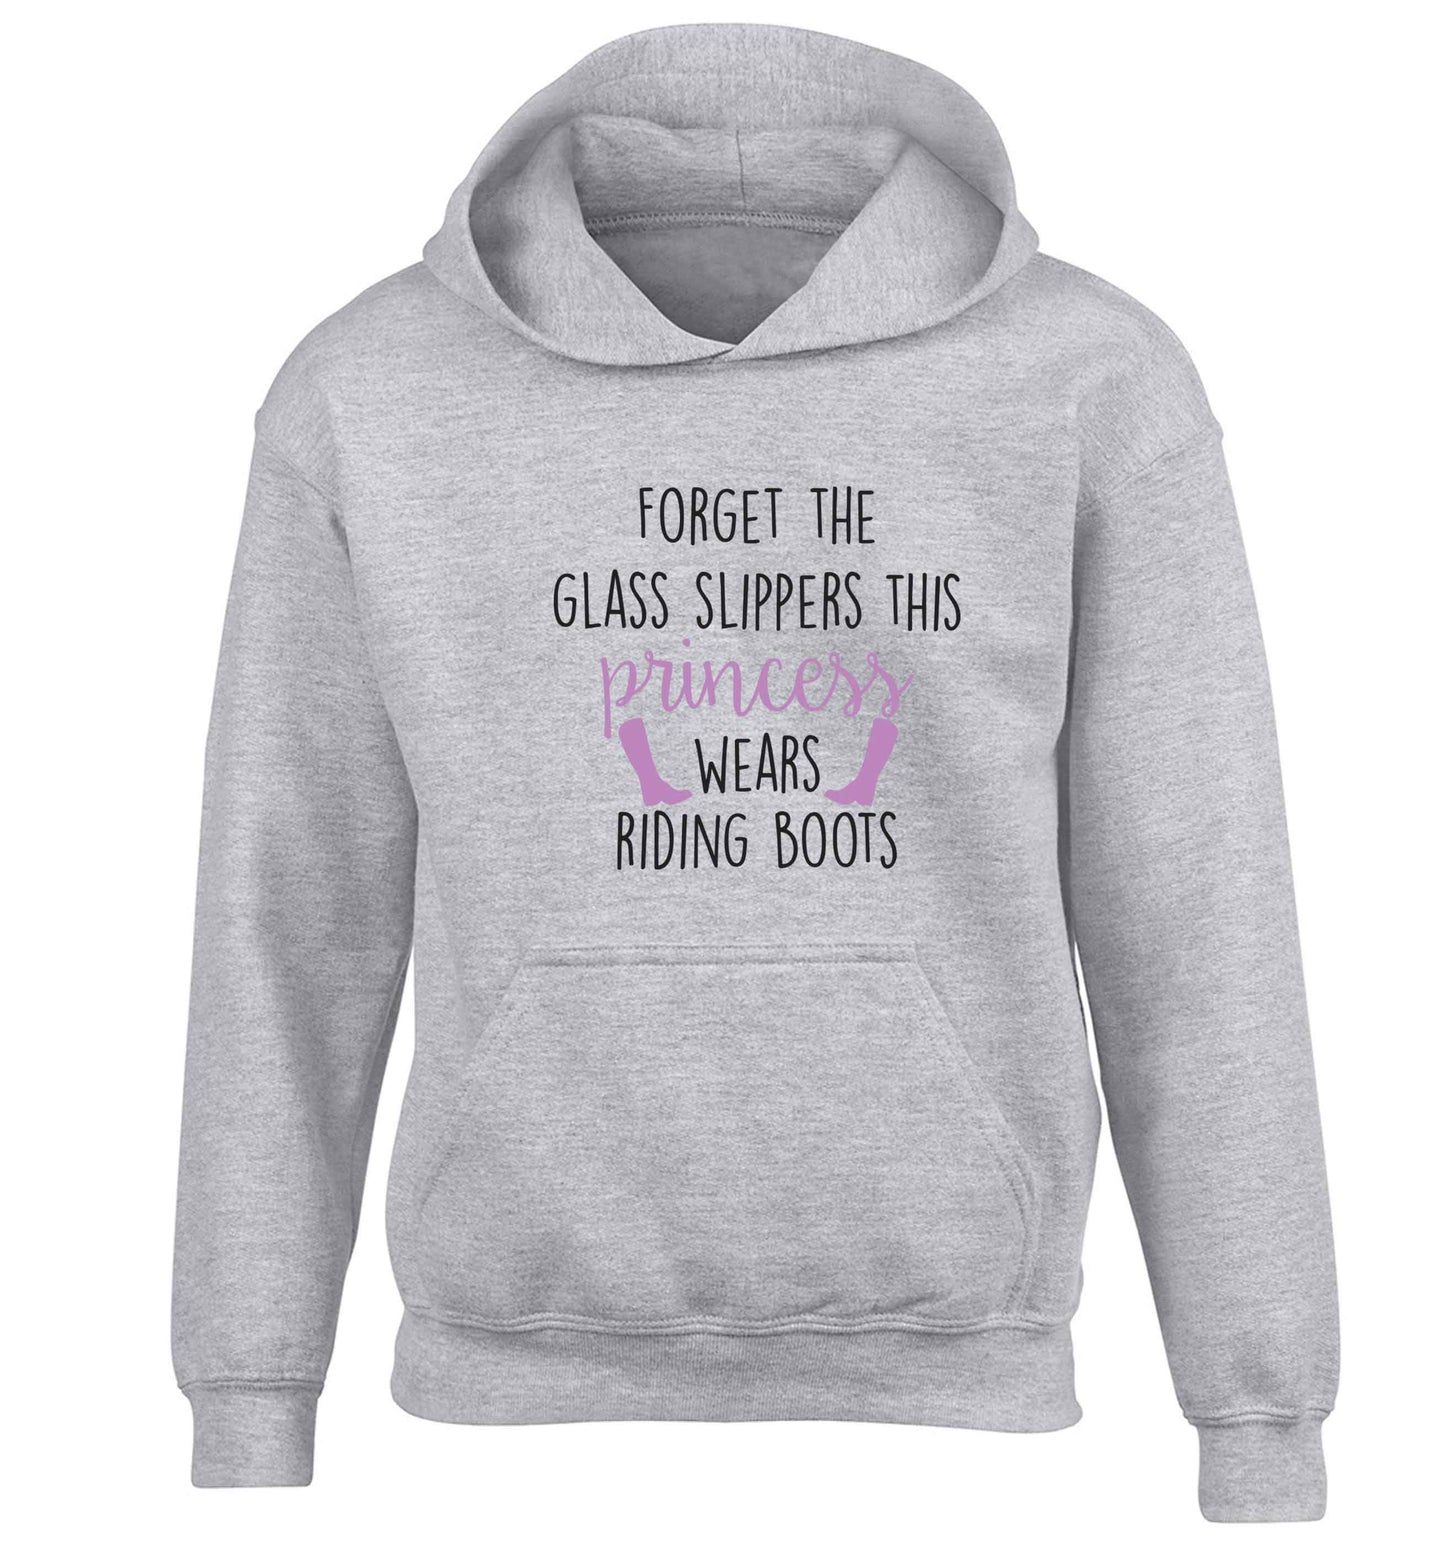 Forget the glass slippers this princess wears riding boots children's grey hoodie 12-13 Years